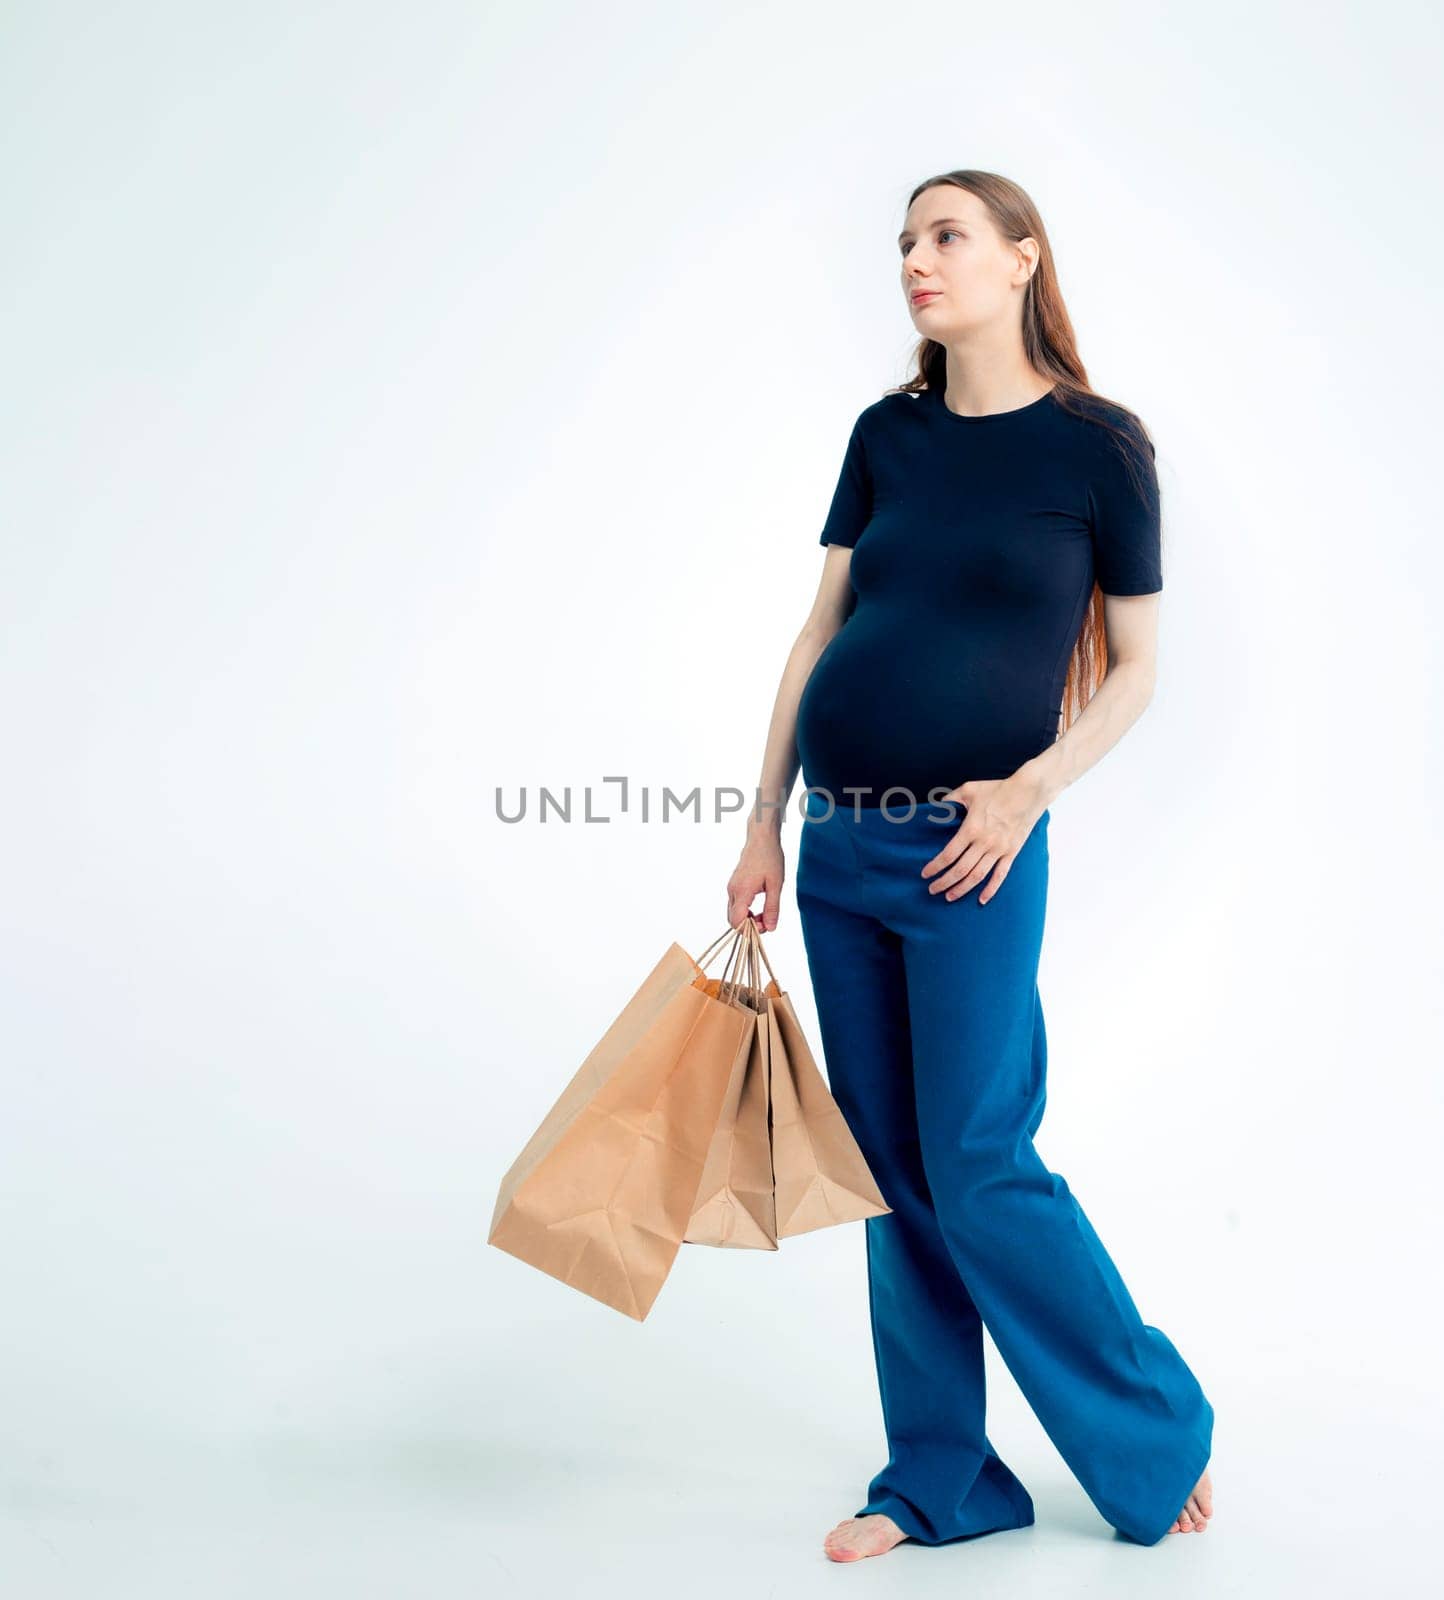 Shopping concept: Young pregnant woman with shopping bags full length portrait on white background.